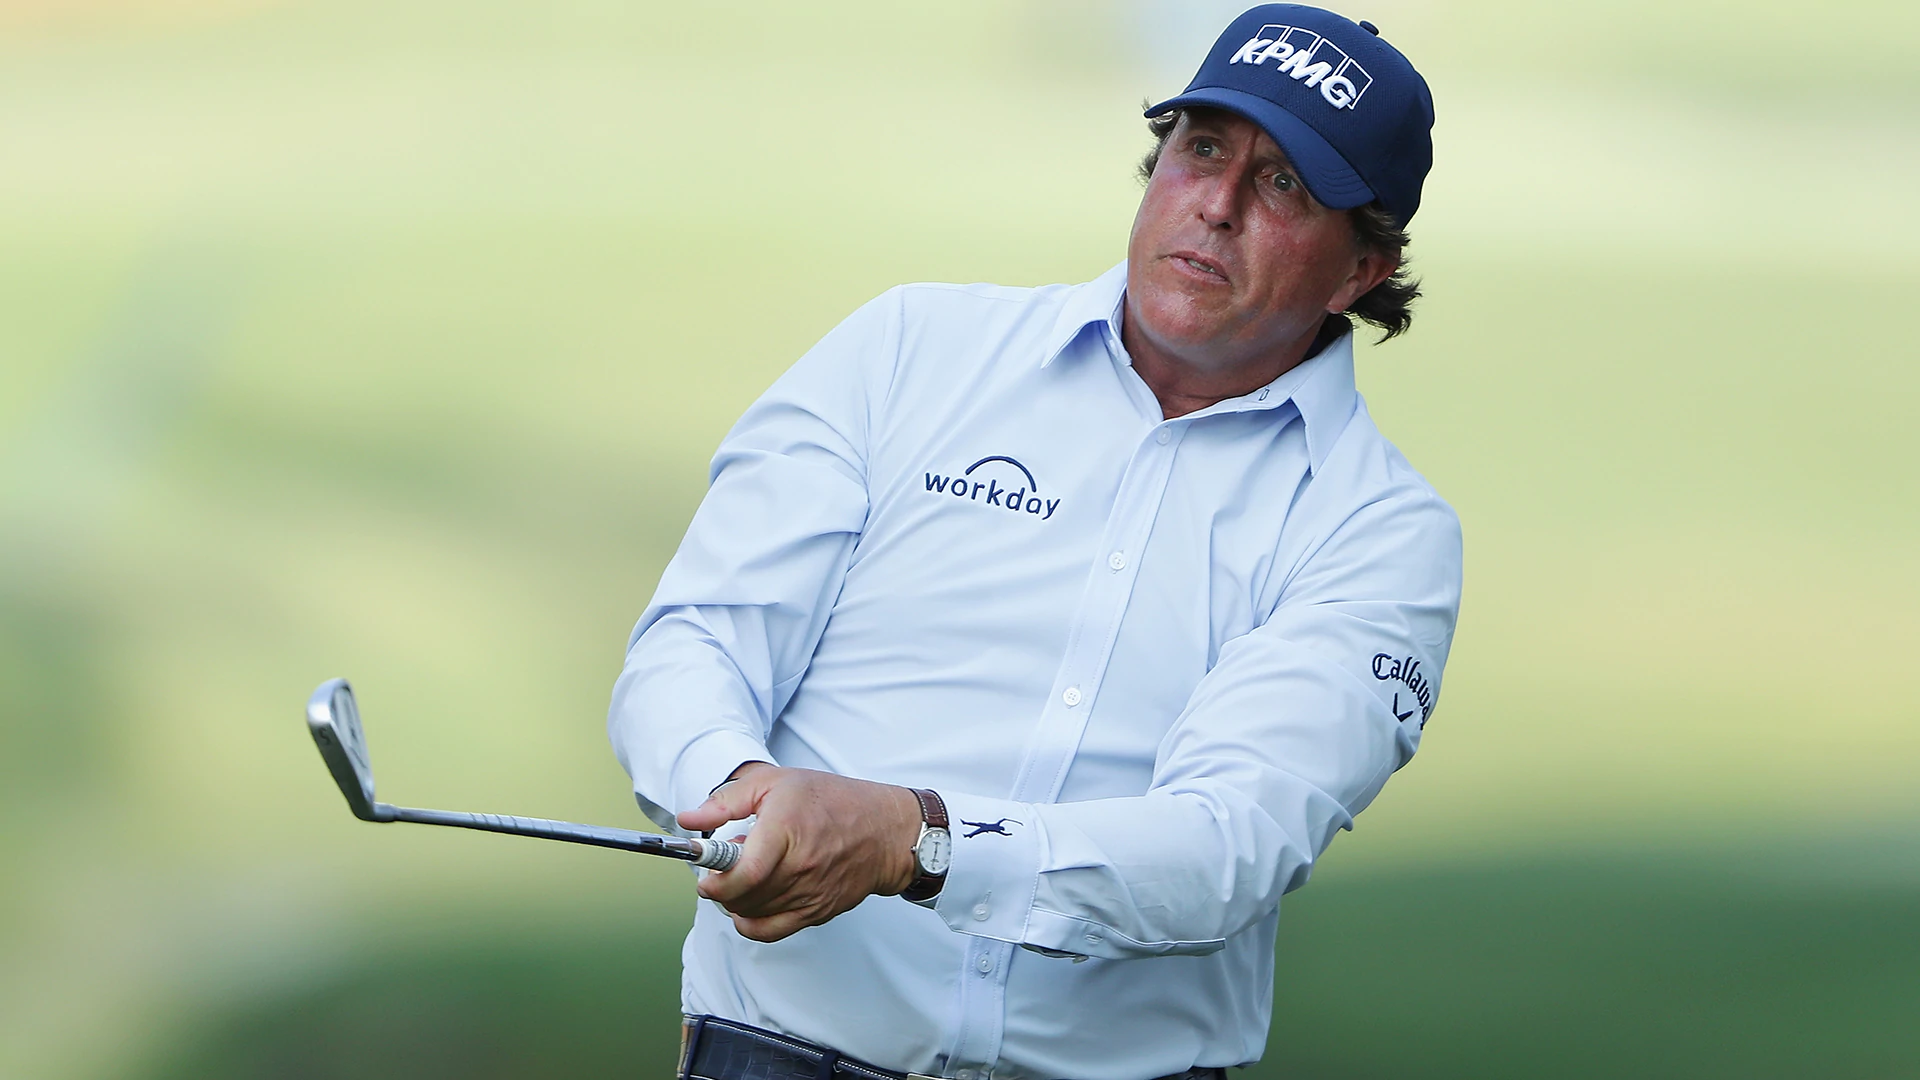 Long-sleeve Mickelson shirts on sale to public